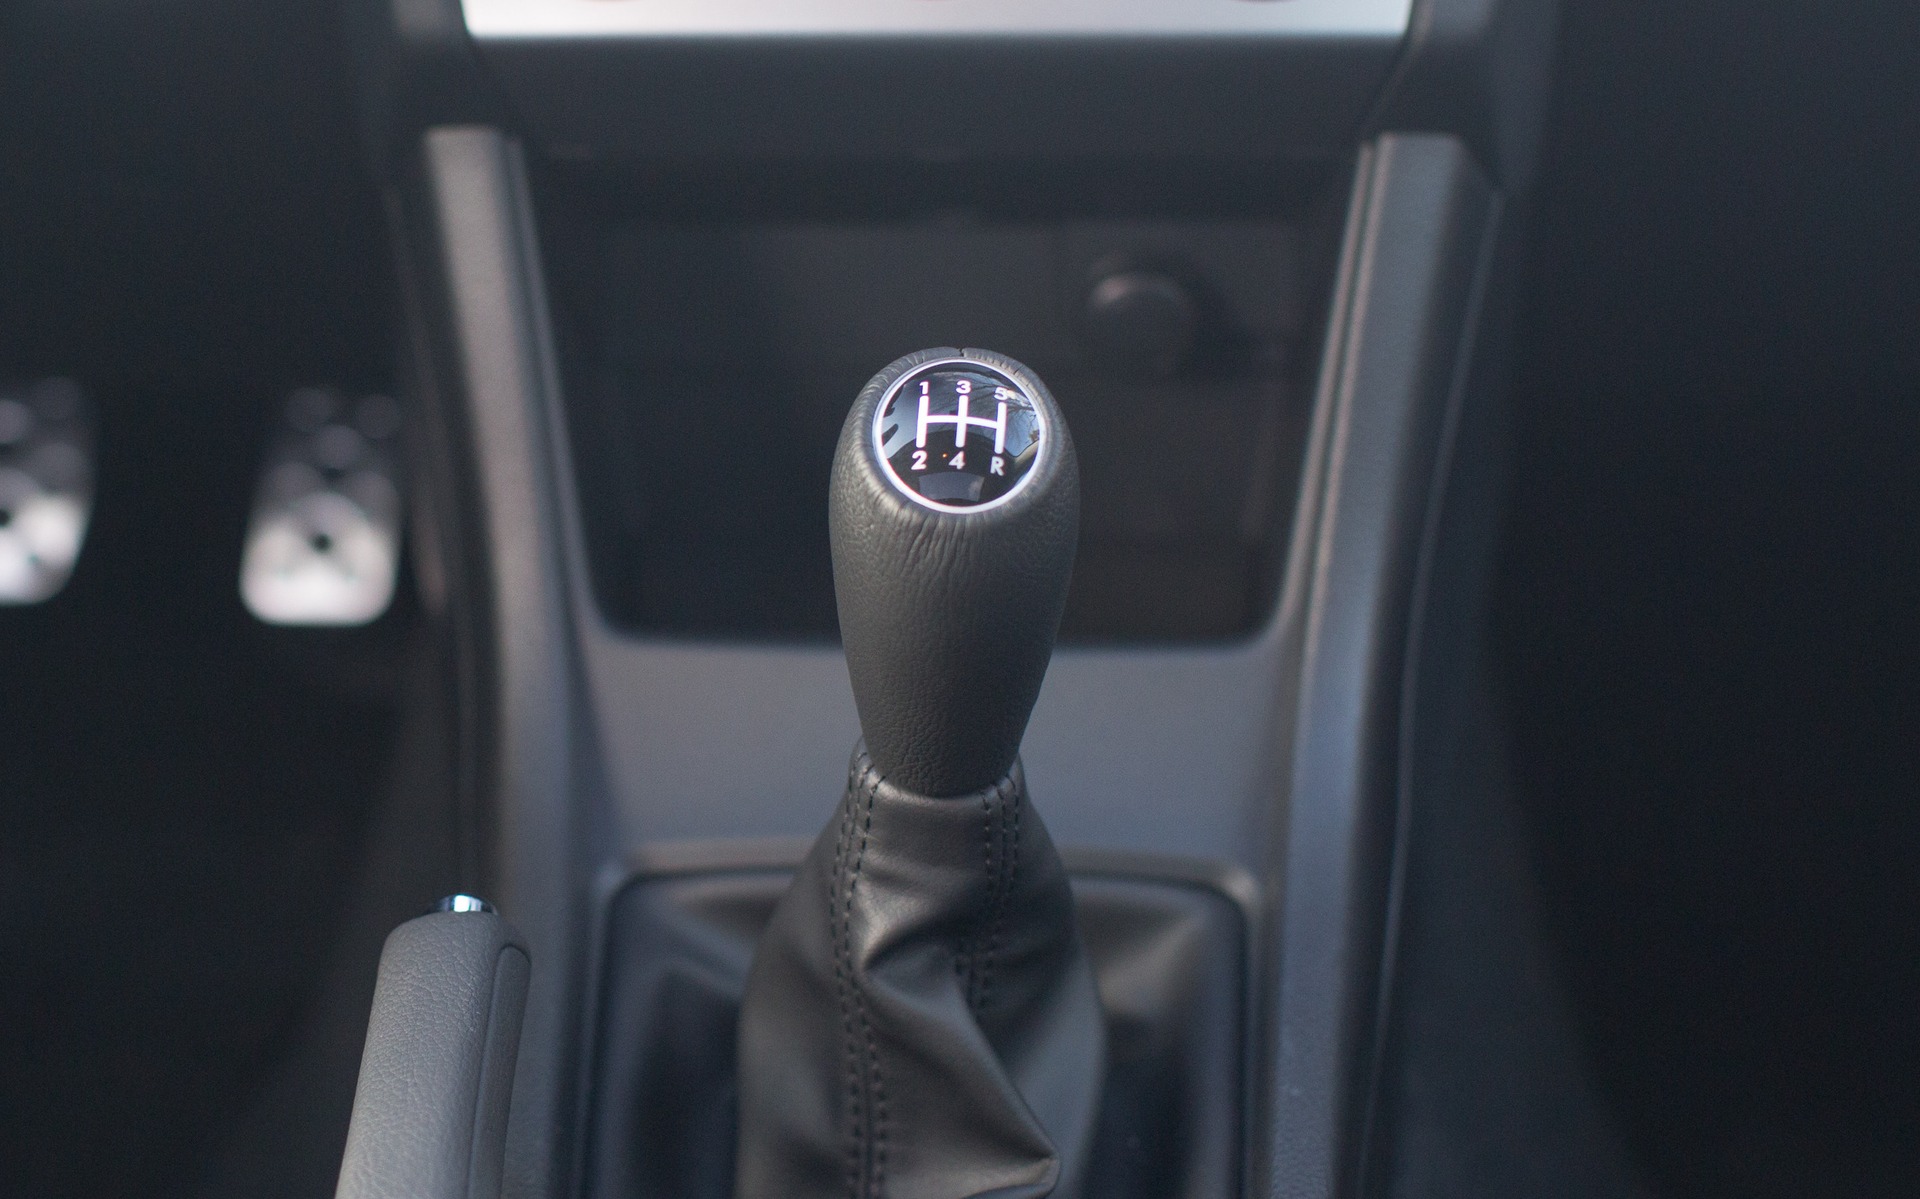 The manual gearbox would be better if it had an extra gear.